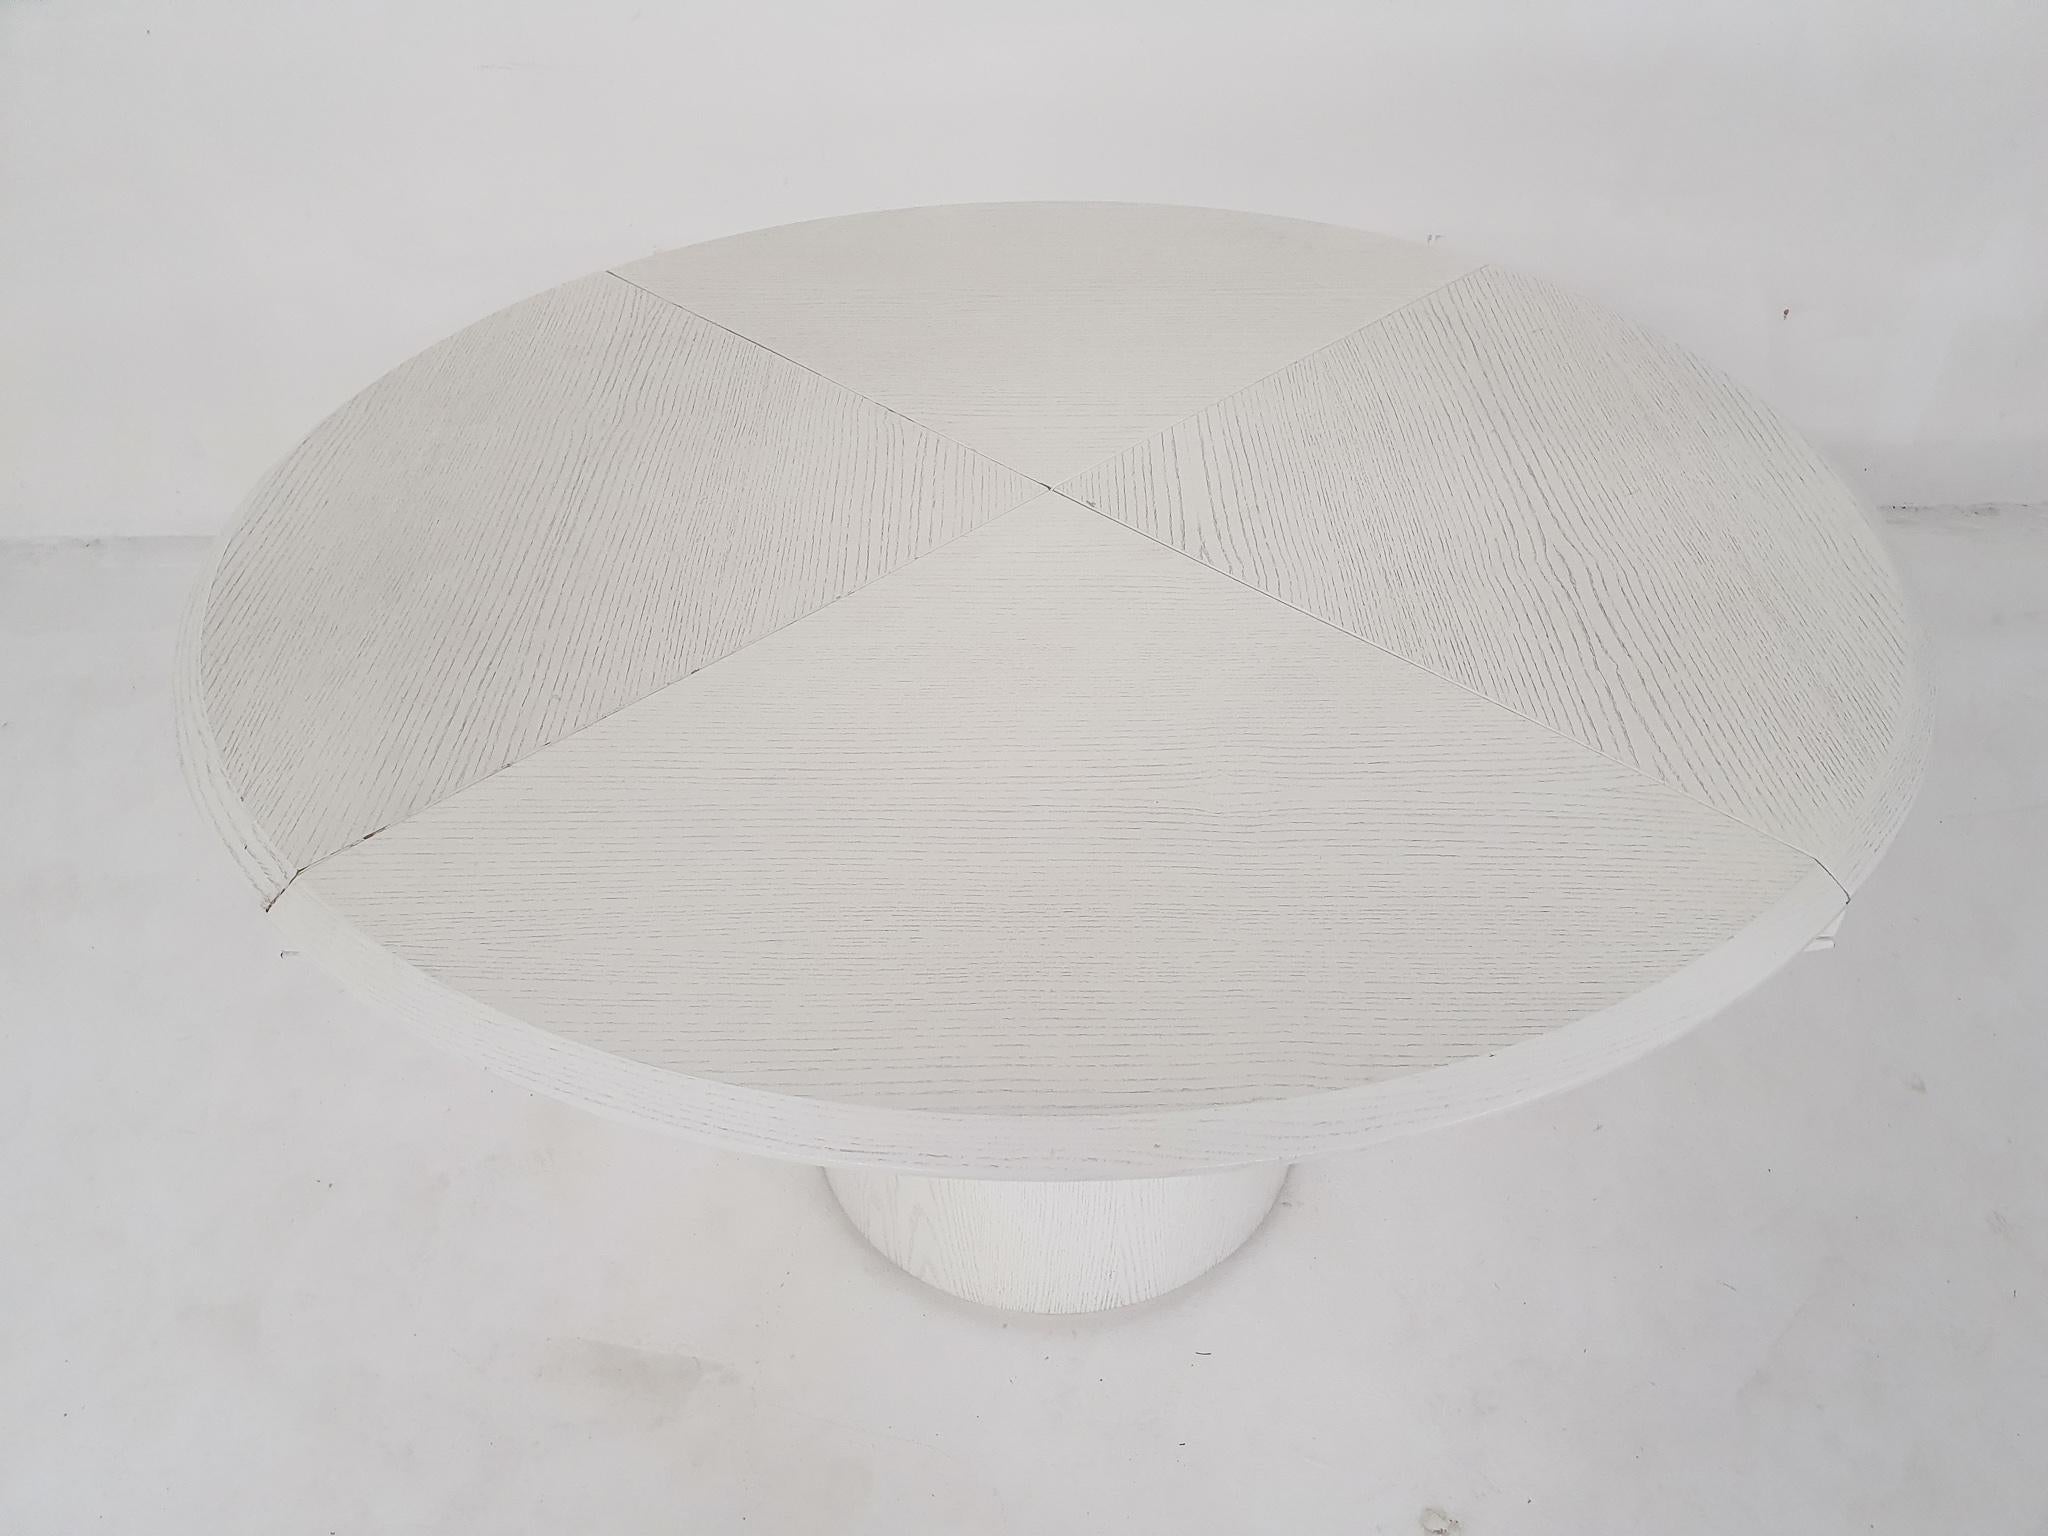 White ash-wooden dining table which has four leaves to turn the table from a round into a square table.
The height of the table is 70 cm and will be 76 cm when it is round (diameter 125cm).